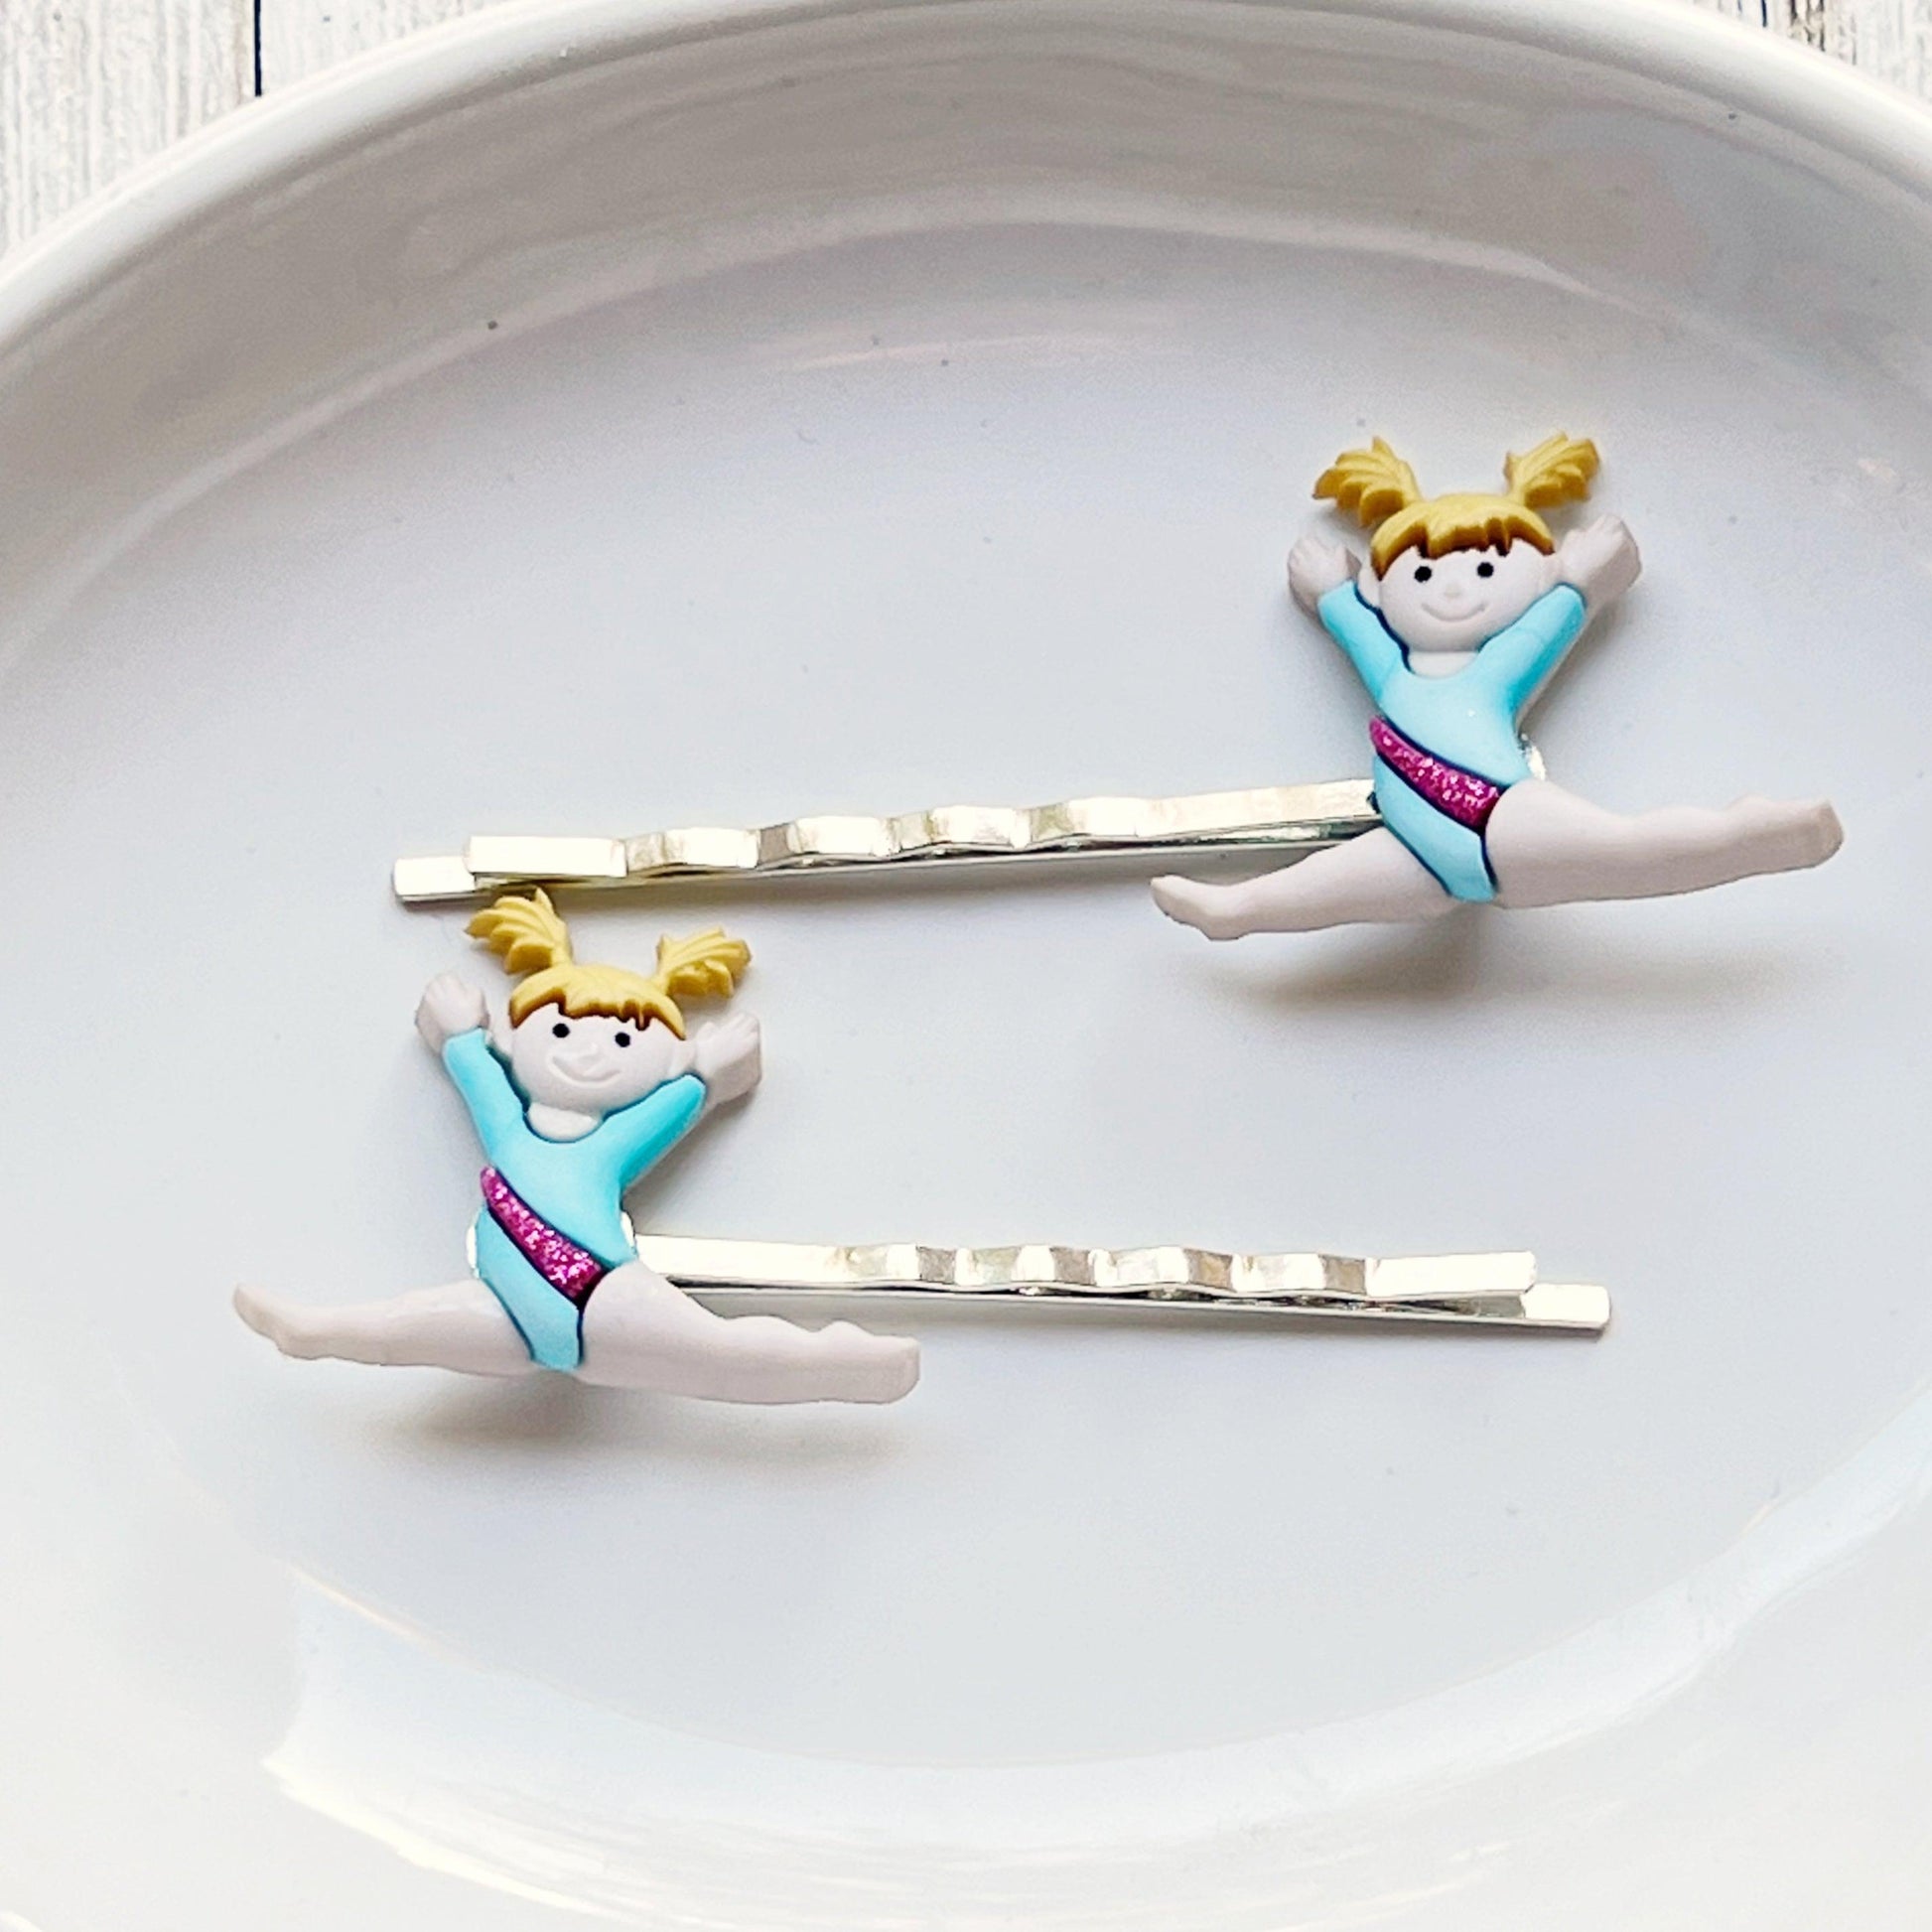 Set of 2 Hair Pins with Gymnasts - Cheerful Accessories for Gymnastics Enthusiasts